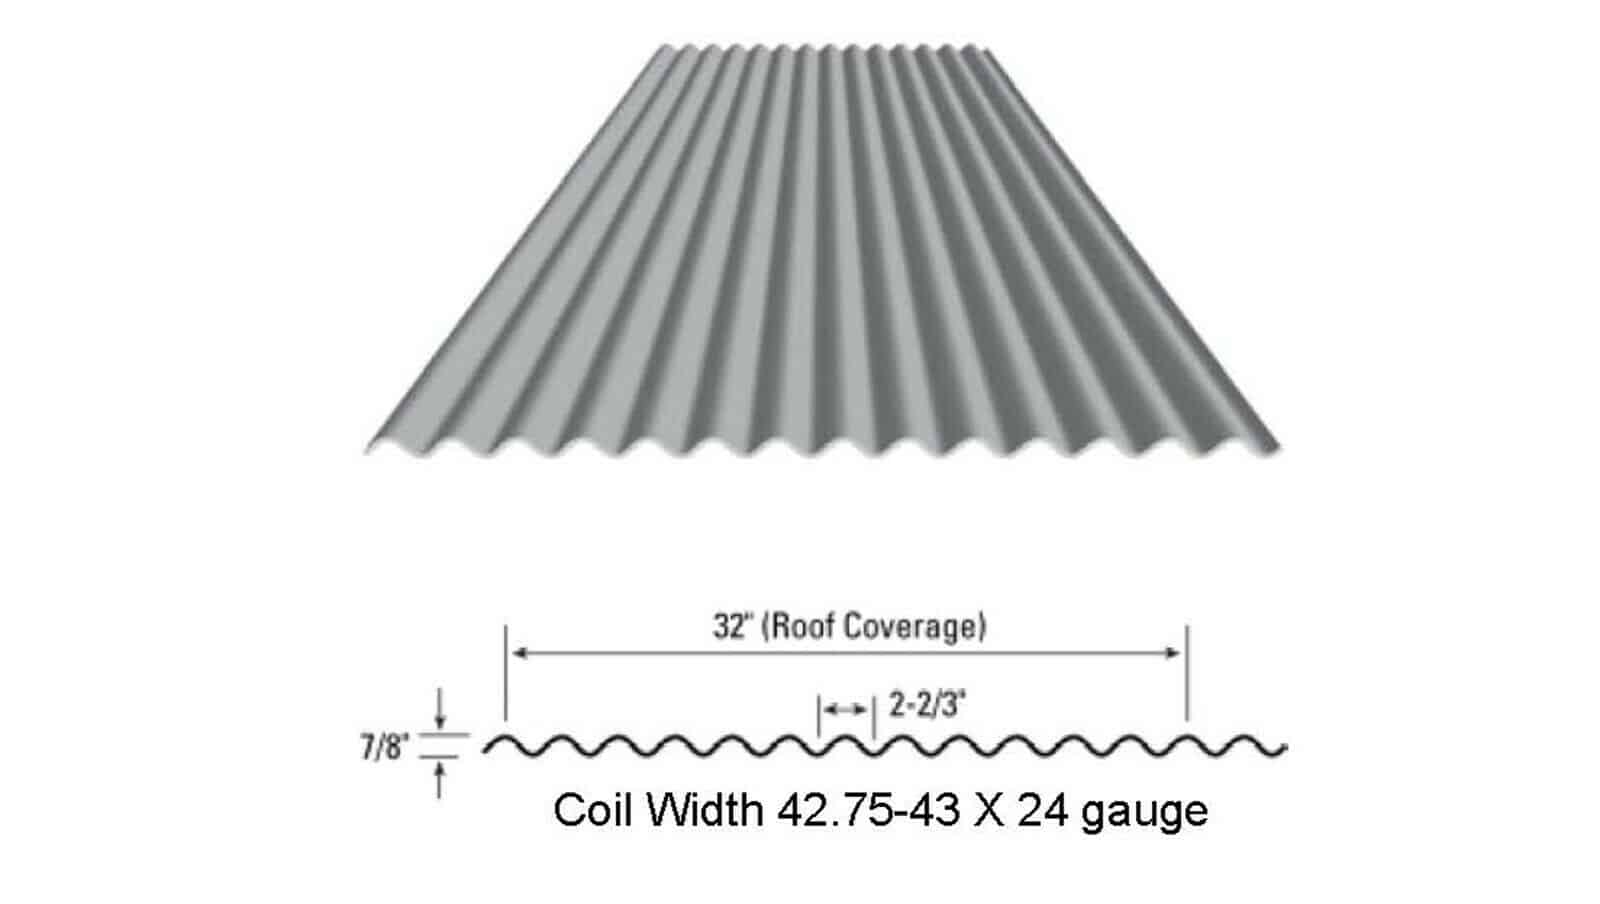 7/8 Corrugated Metal Roofing